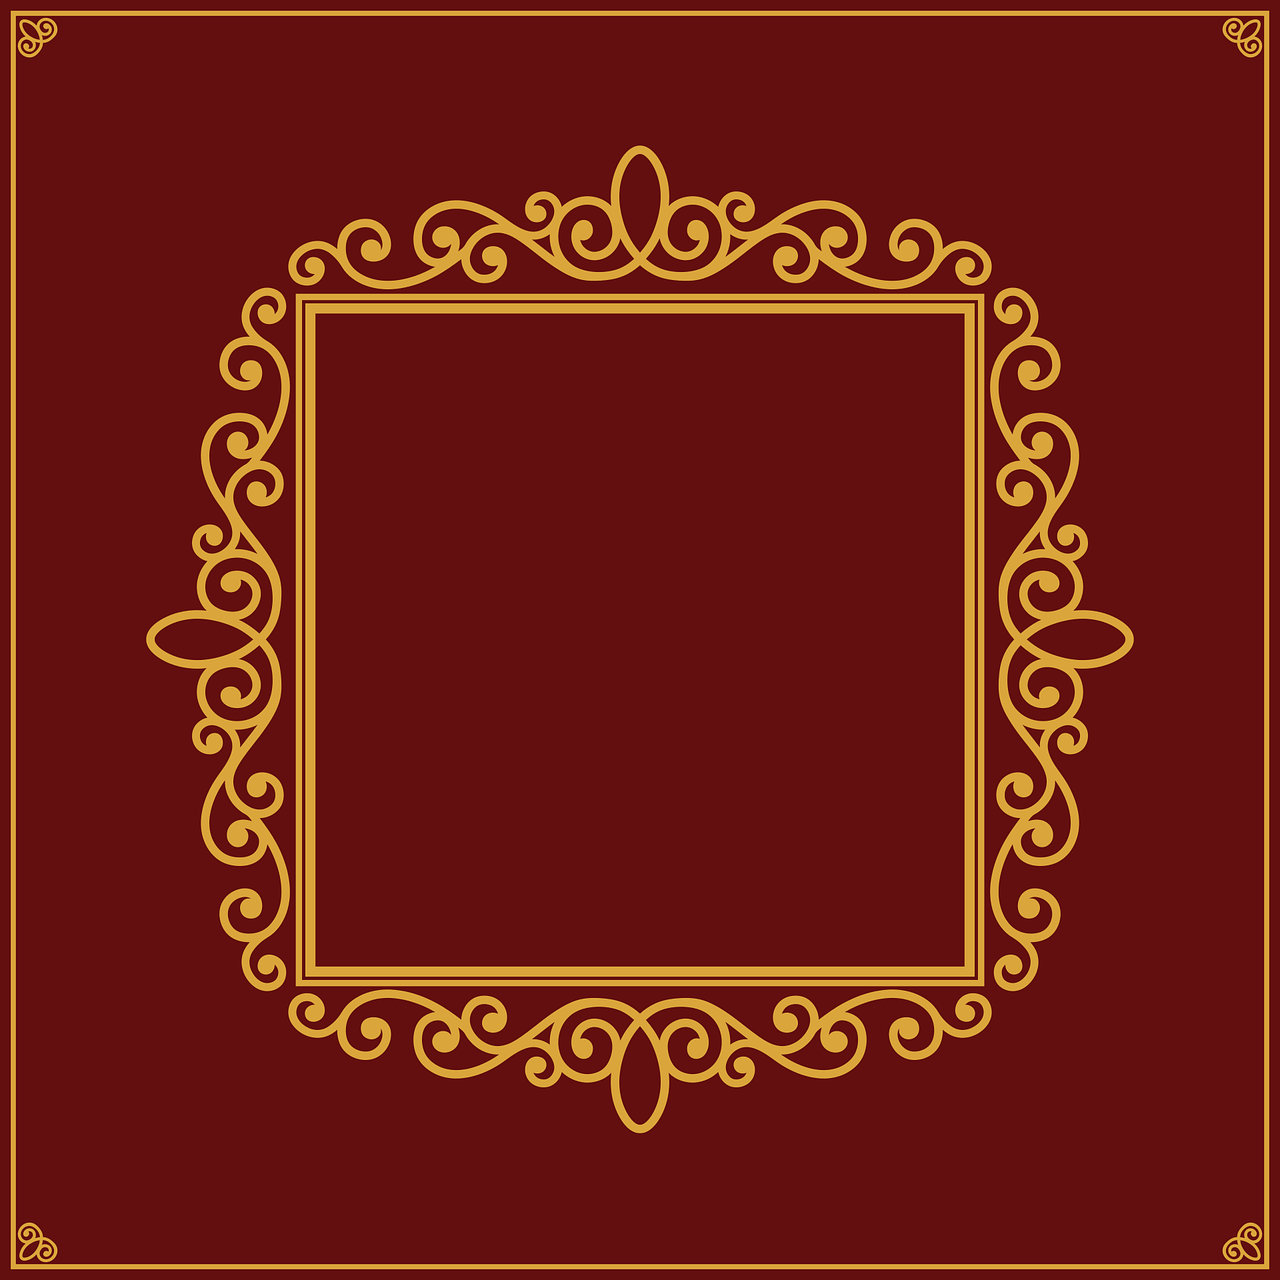 a golden frame on a red background, by Andrei Kolkoutine, baroque, stylized thin lines, svg vector art, album cover design, on simple background